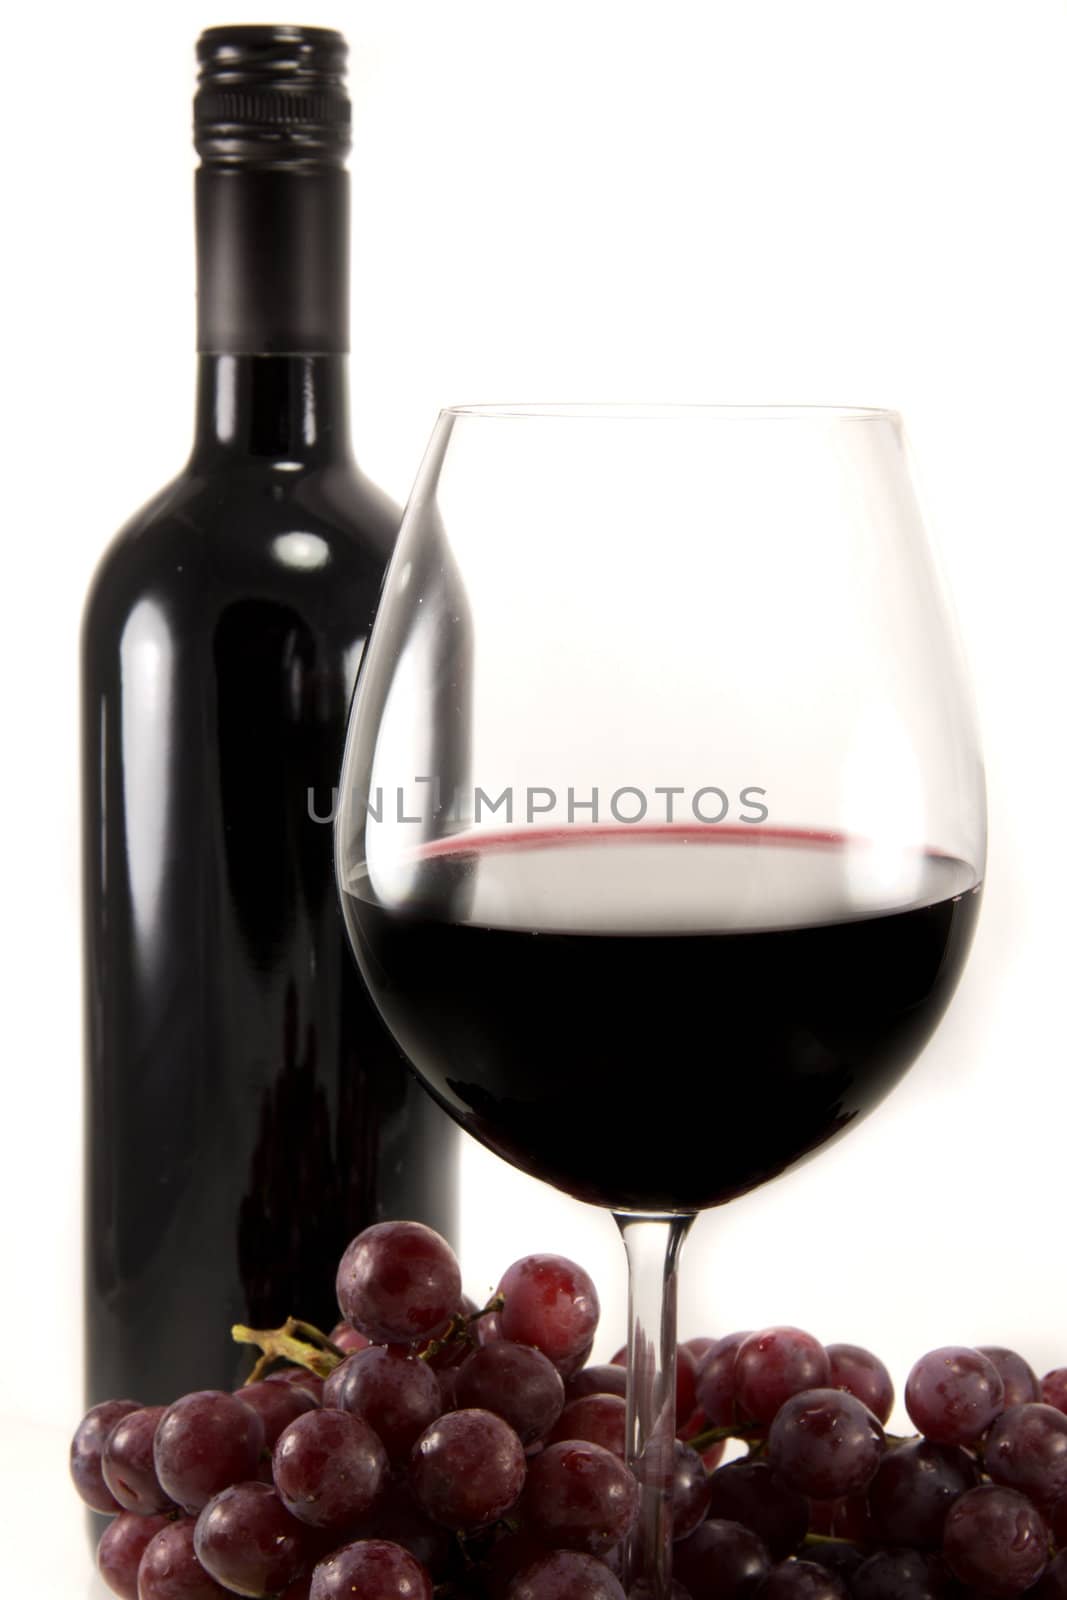 Picture of a bottle of red wine, and a few grapes